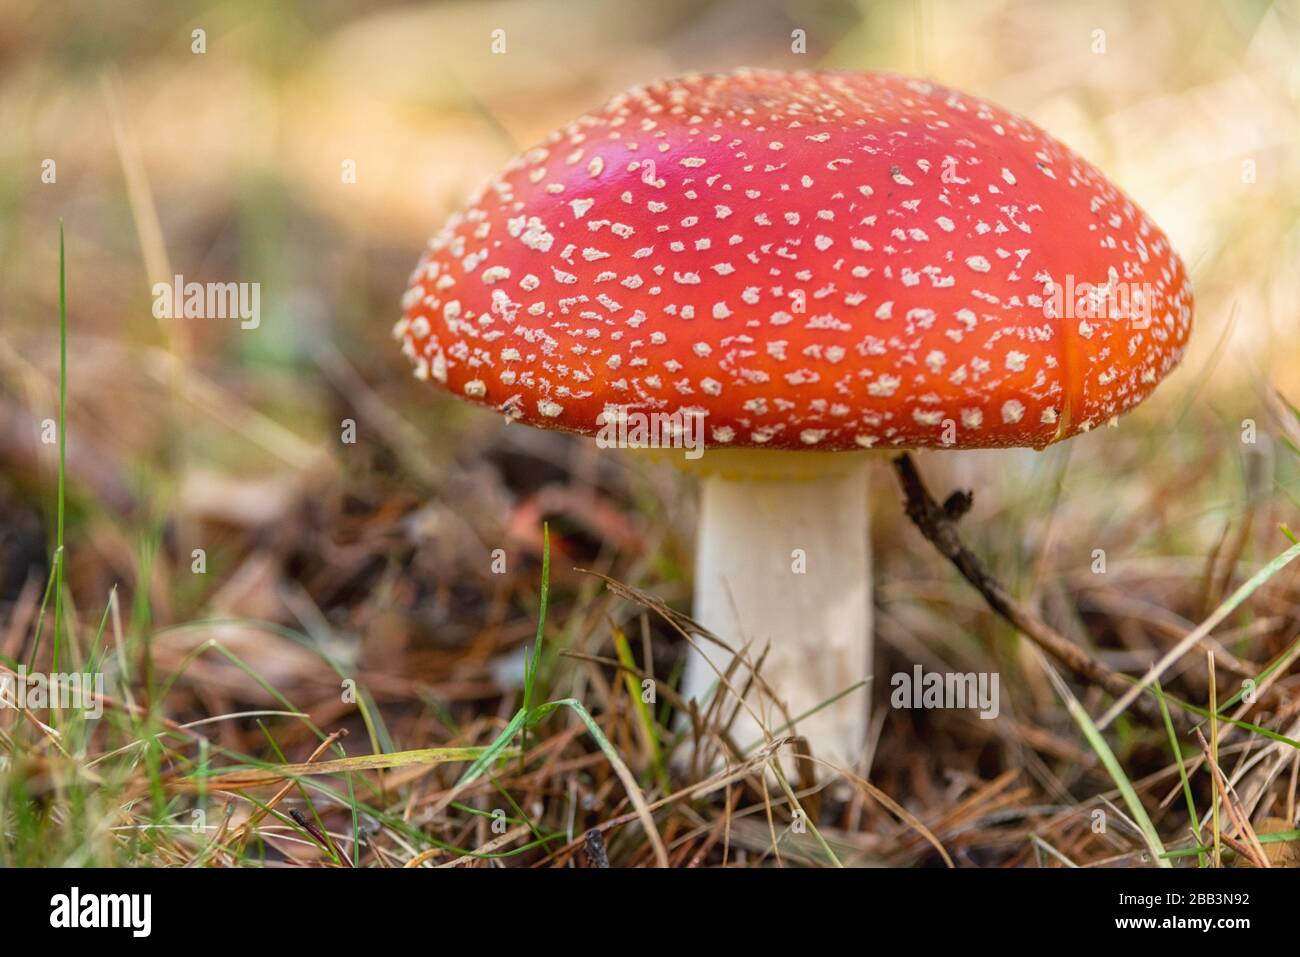 Amanita Muscaria, poisonous mushroom in natural forest background. Stock Photo